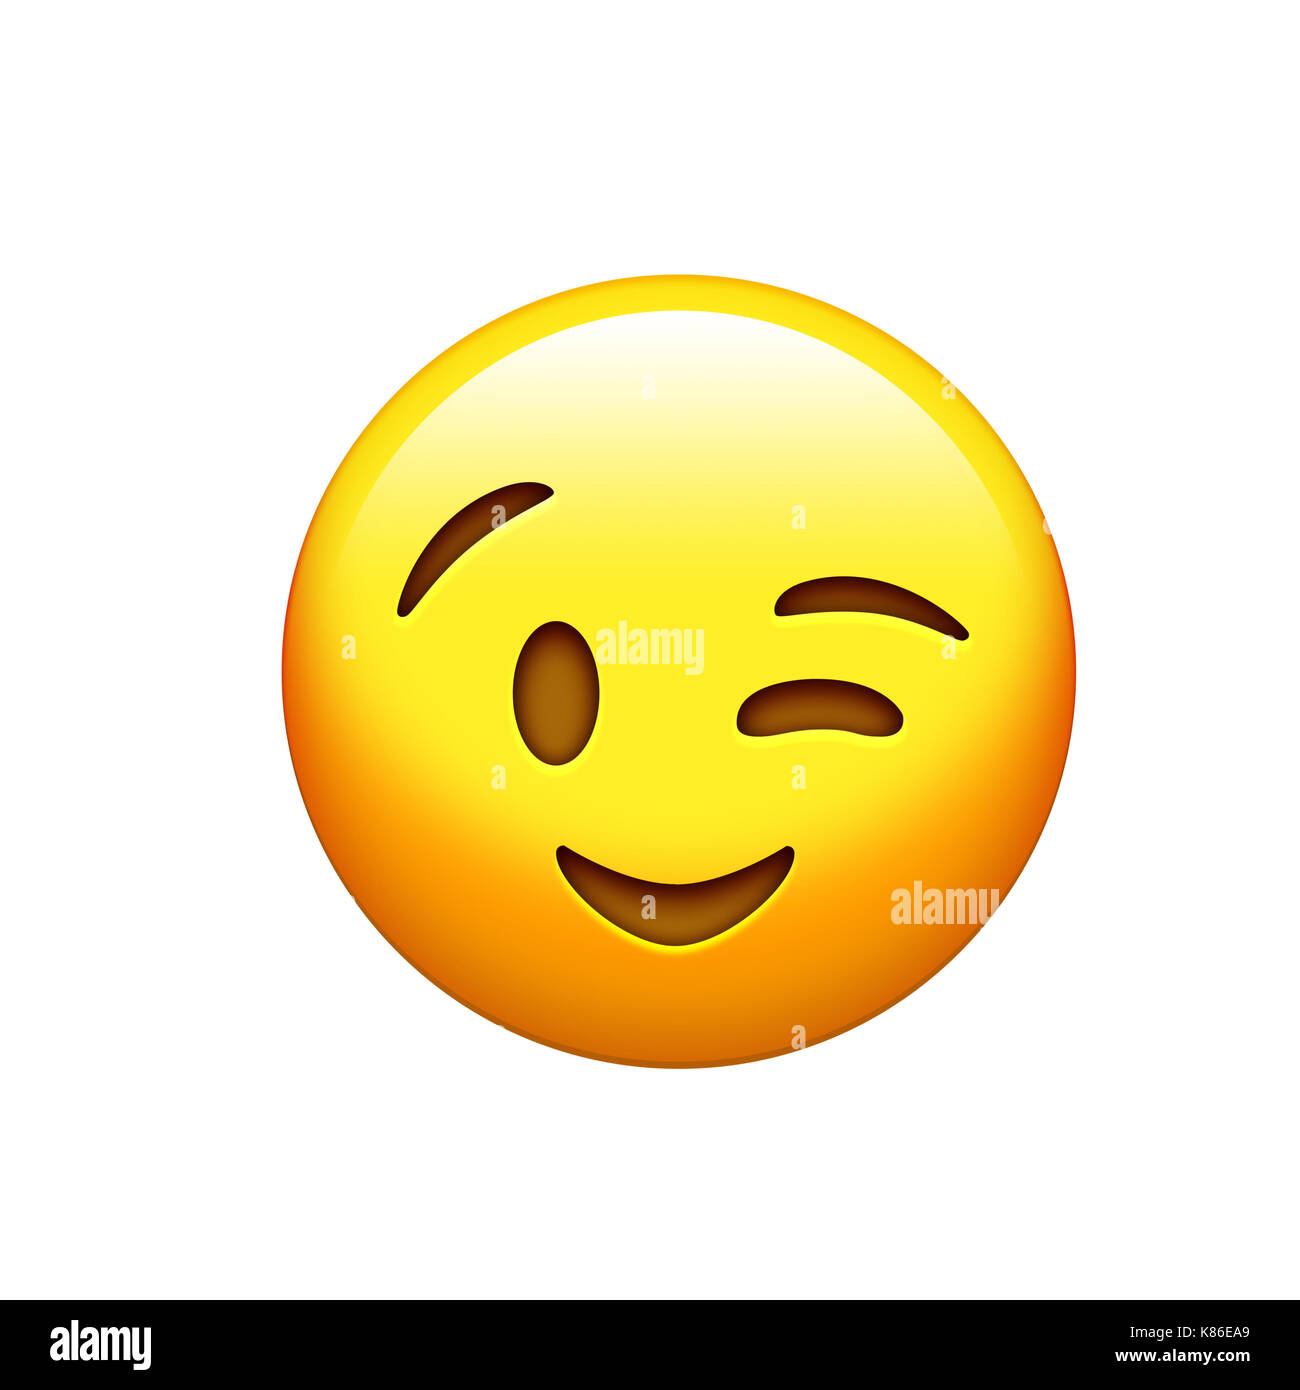 The isolated yellow smiley face and single wink icon Stock Photo